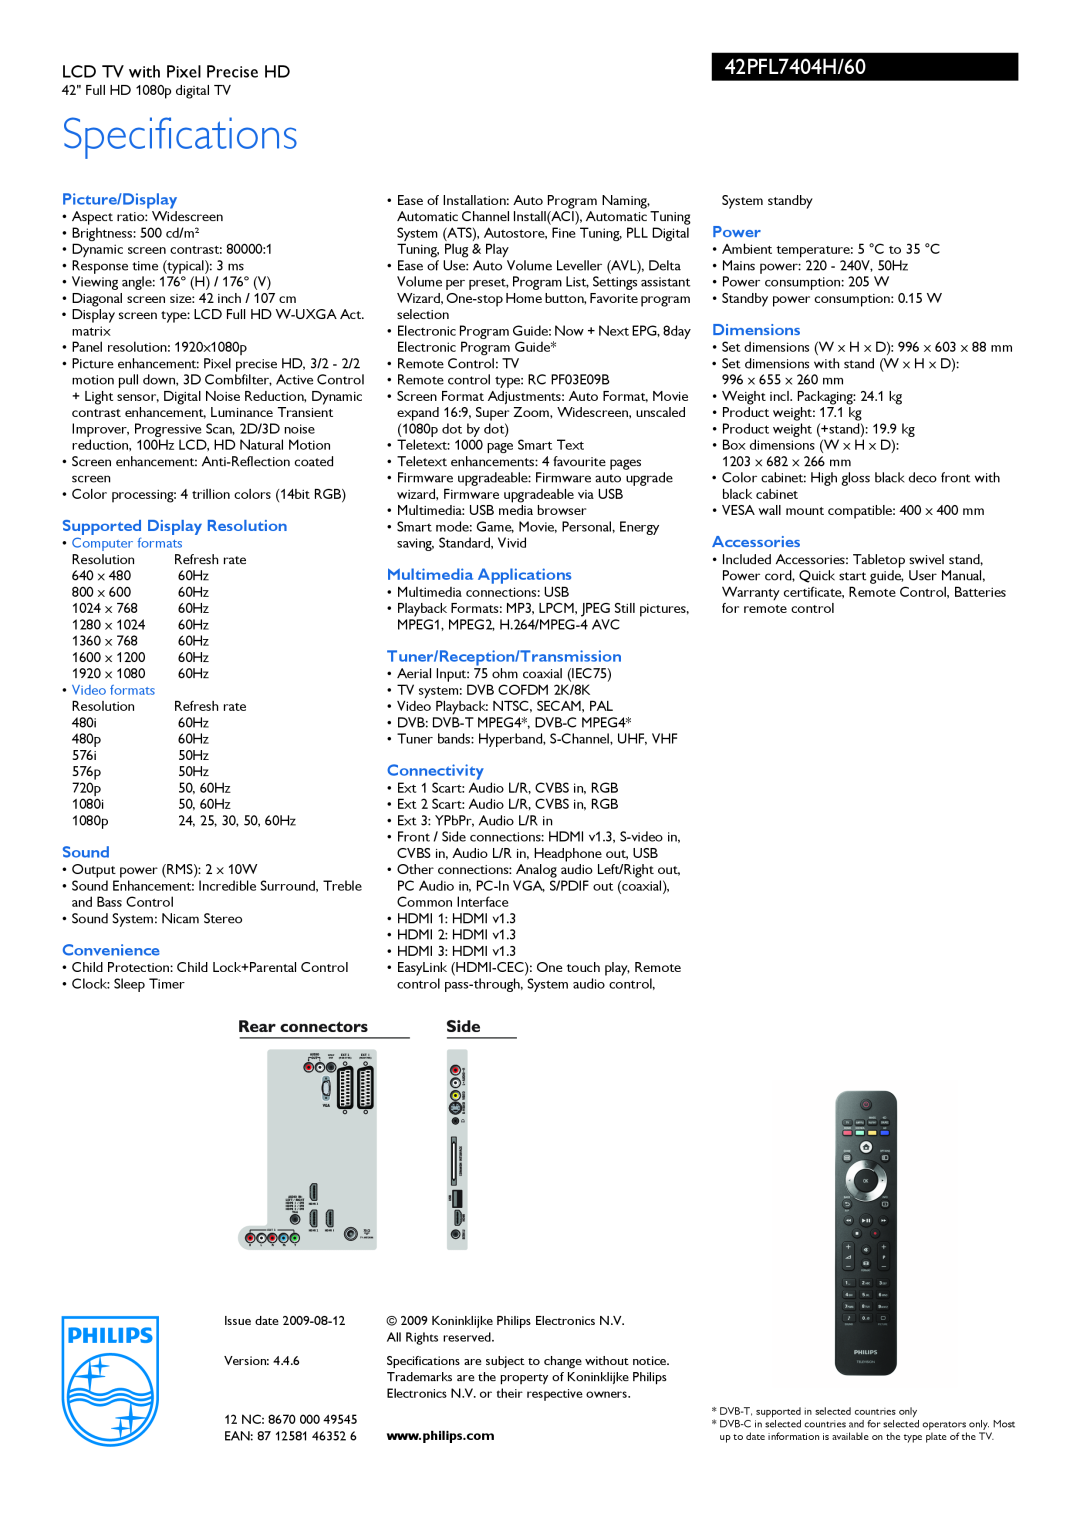 Philips 42PFL7404H Specifications, Picture/Display, Supported Display Resolution, Sound, Convenience, Connectivity, Power 